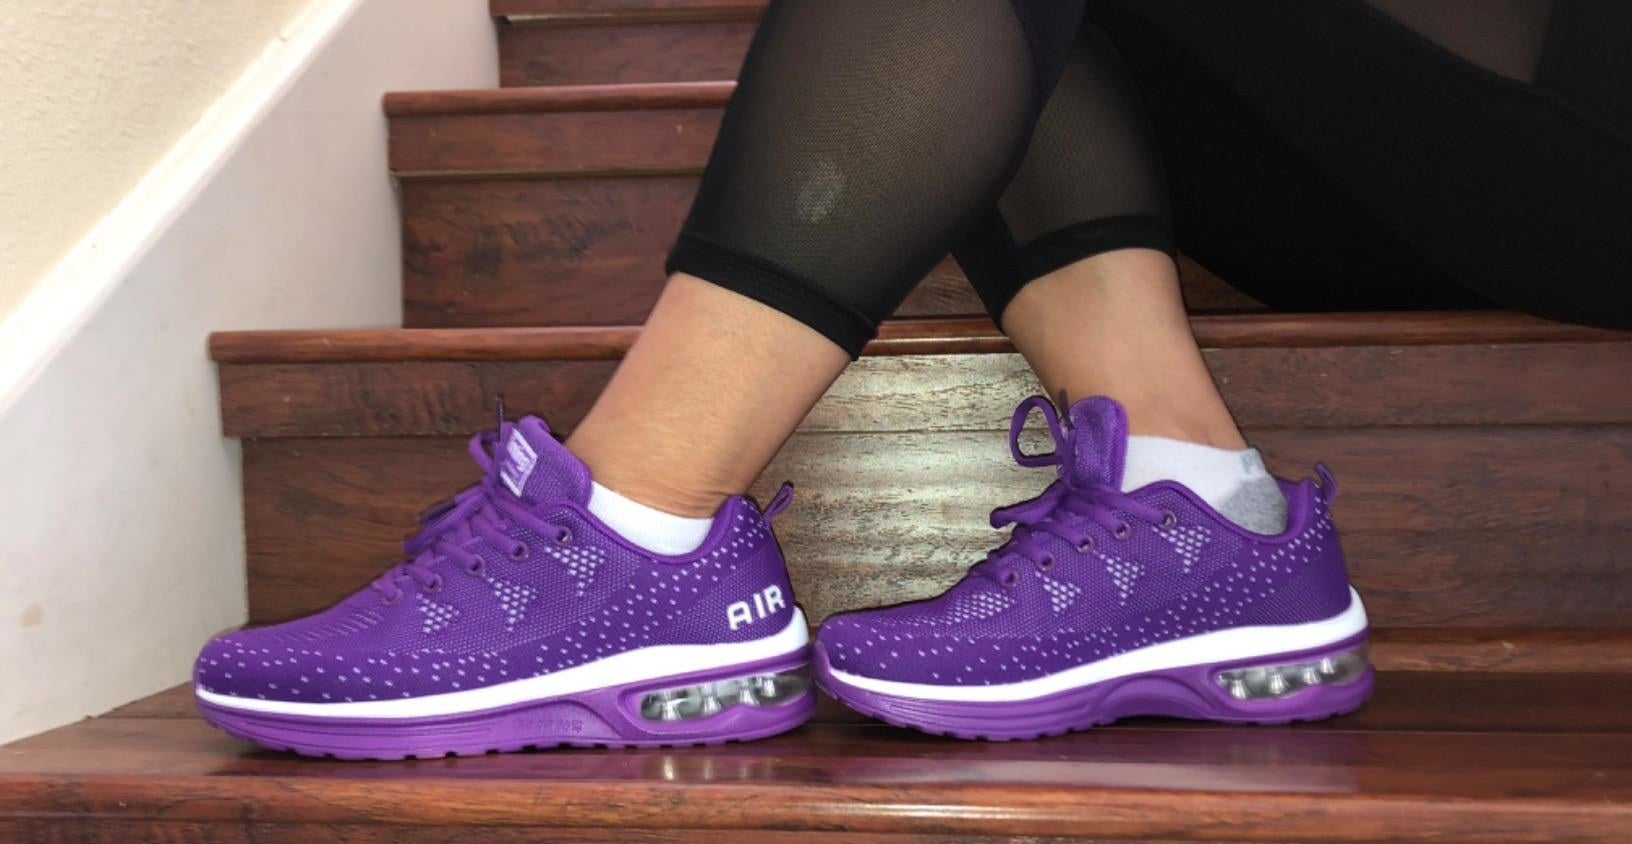 reviewer wears purple and white breathable sneakers with cushioning section on bottom